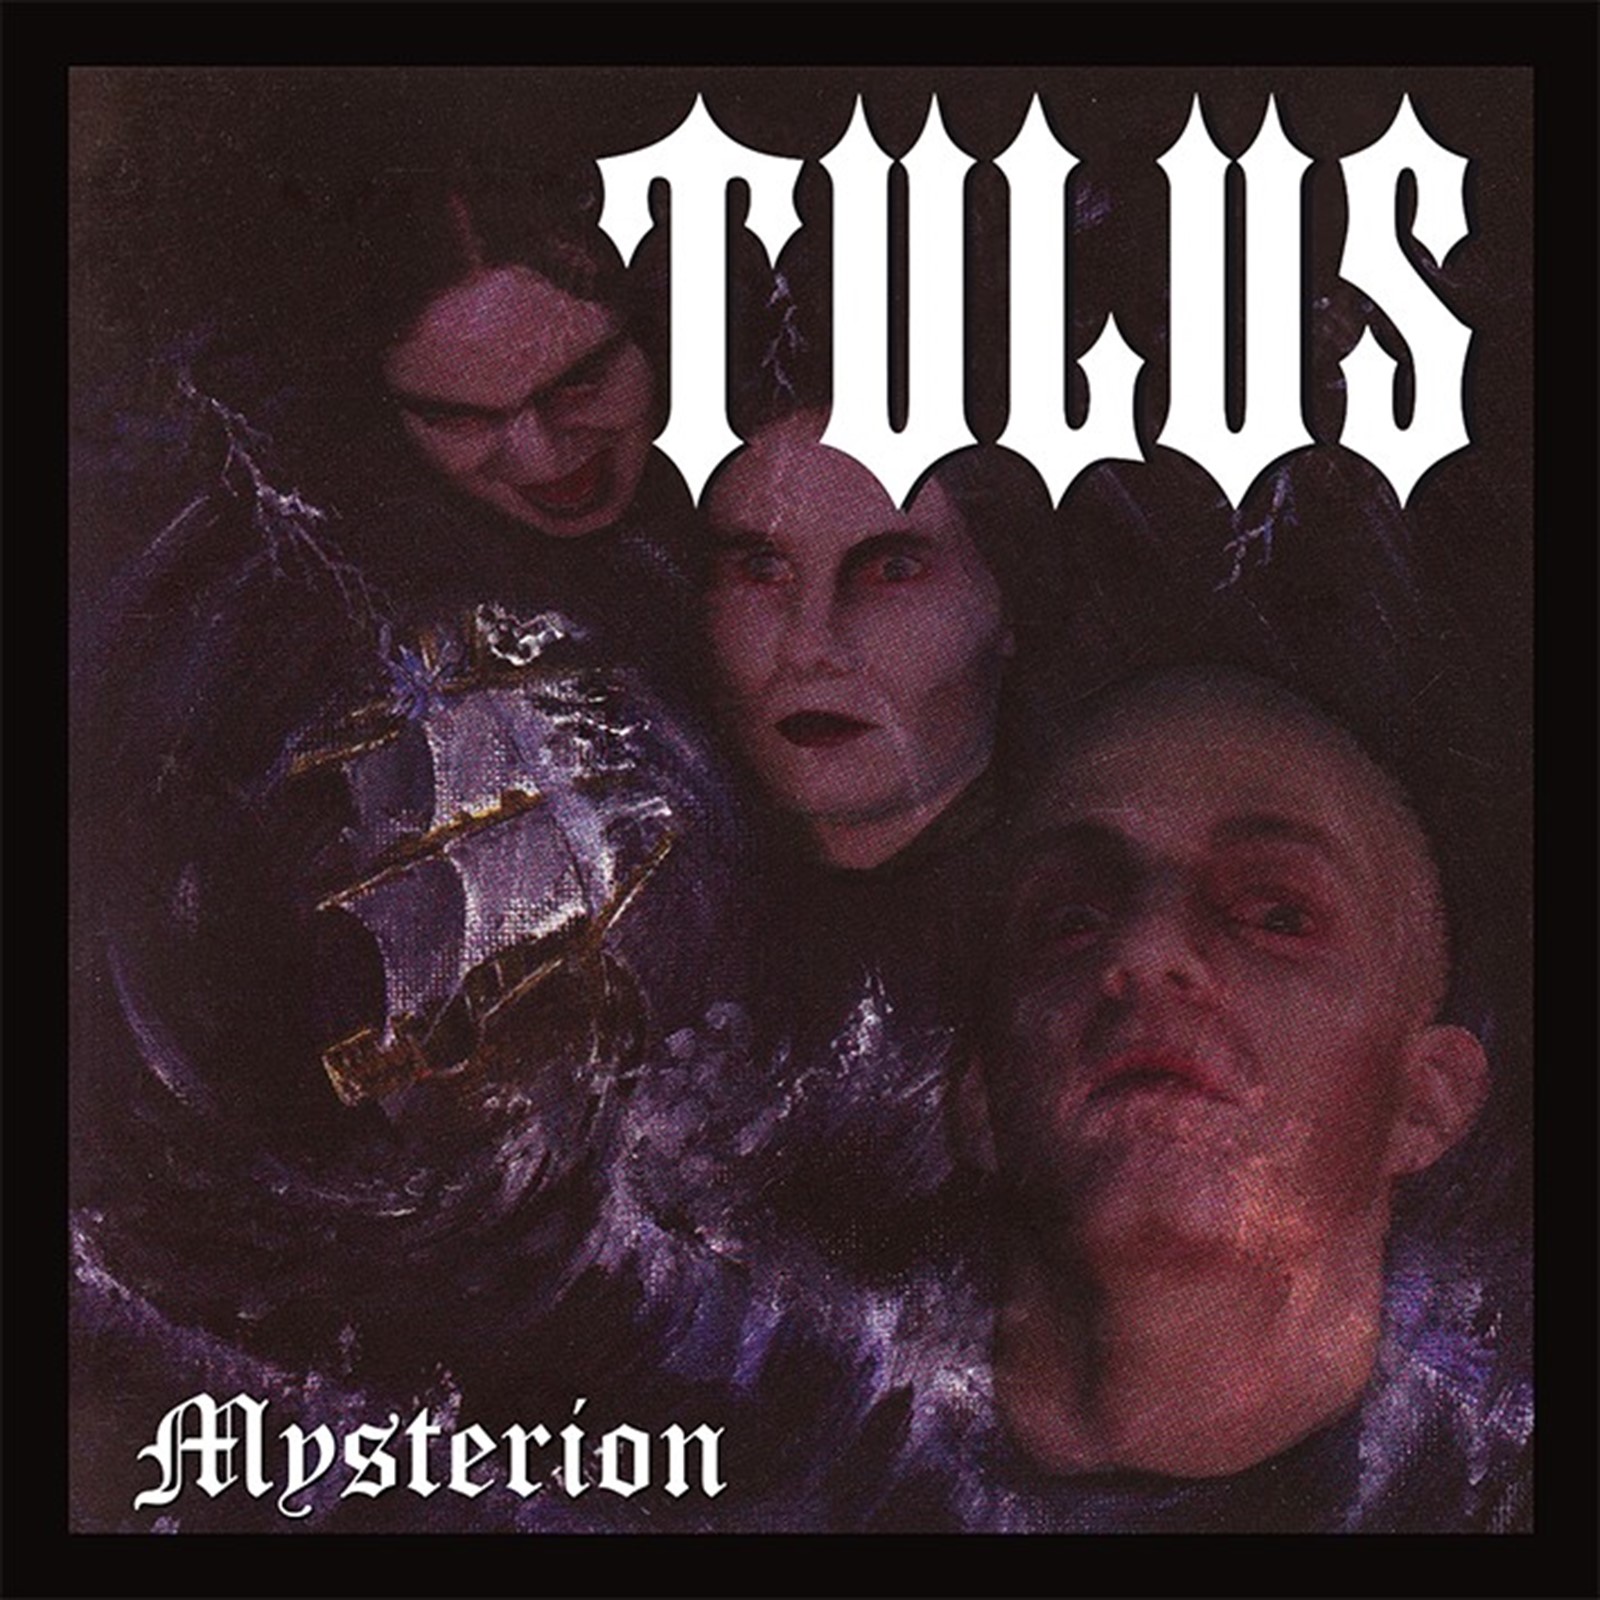 OUT NOW: TULUS "MYSTERION" CD/LP's/DIGITAL - Soulseller Records